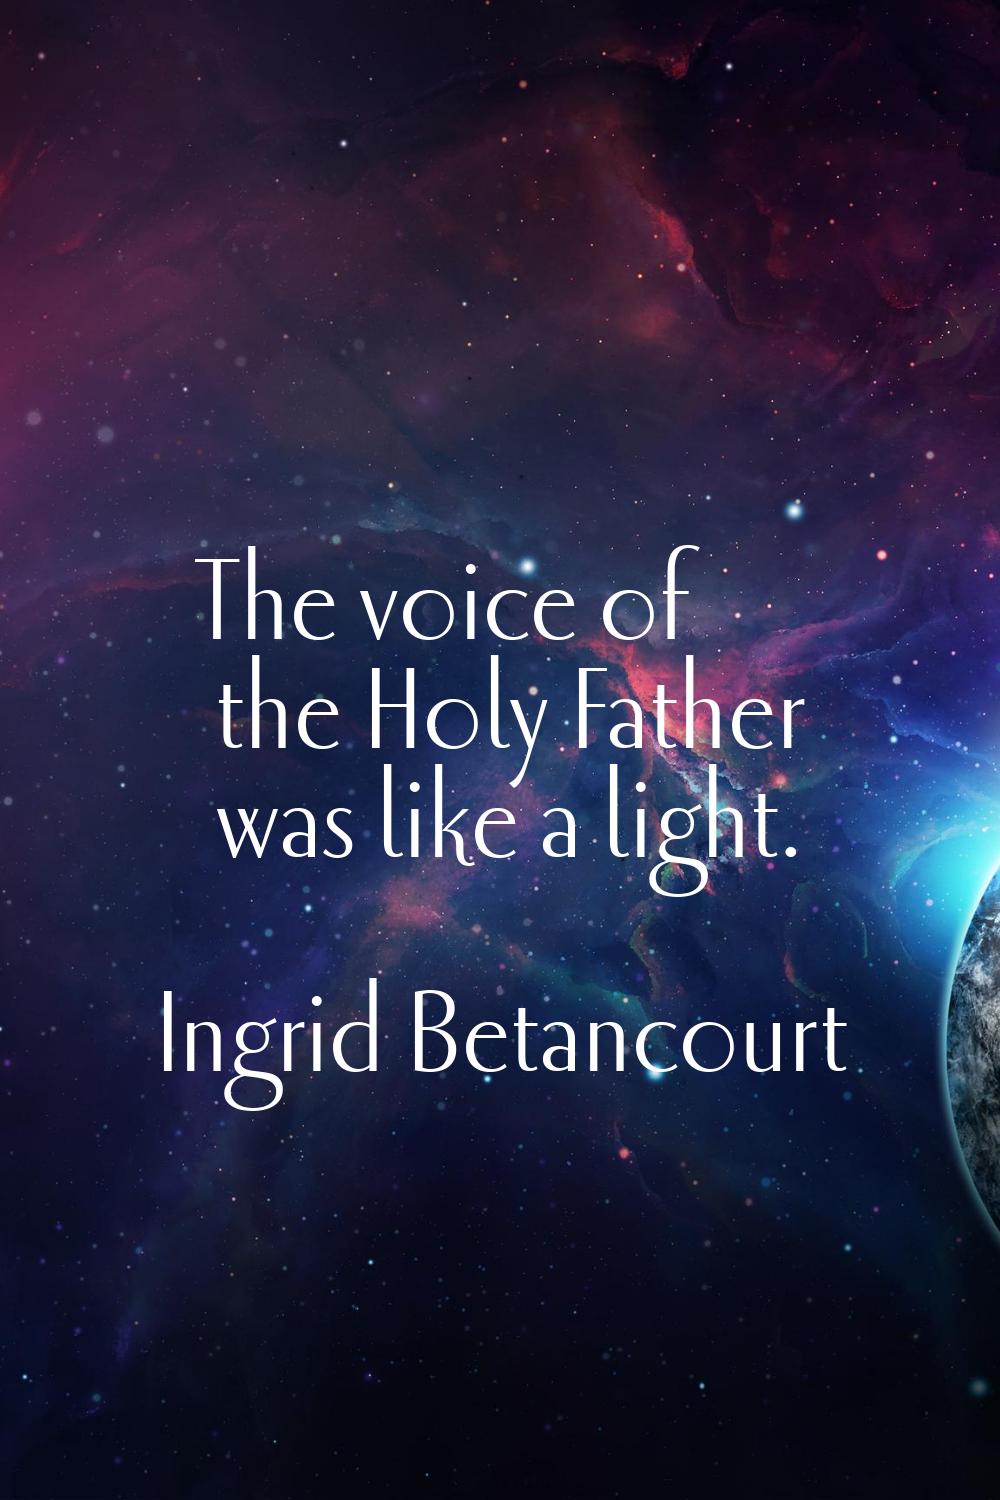 The voice of the Holy Father was like a light.